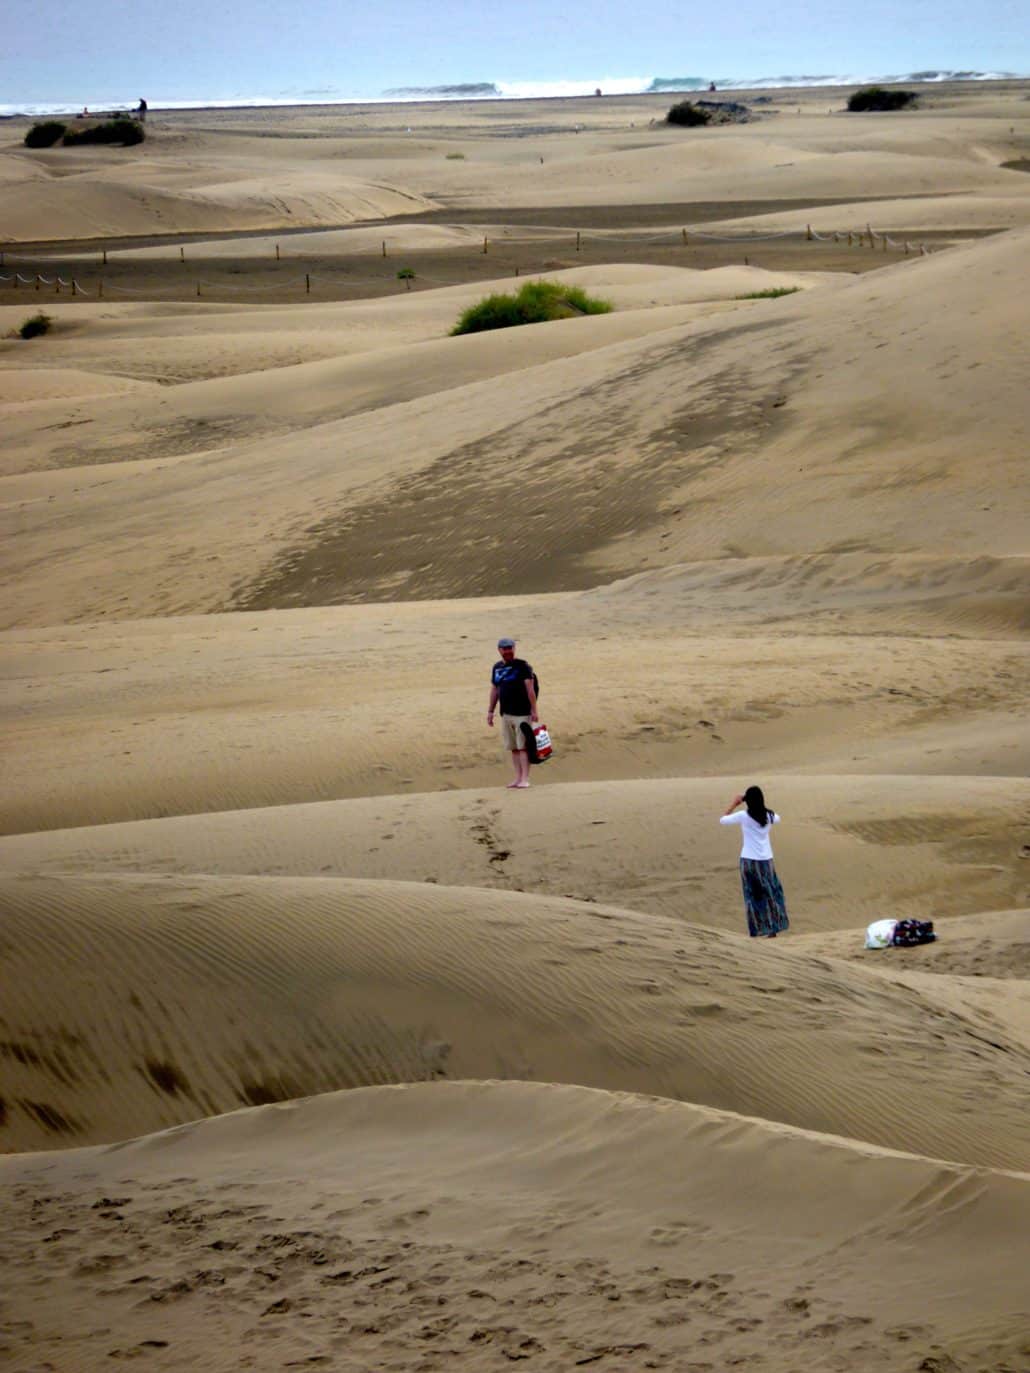 The sand was imported from the Sahara to create Maspalomas beach